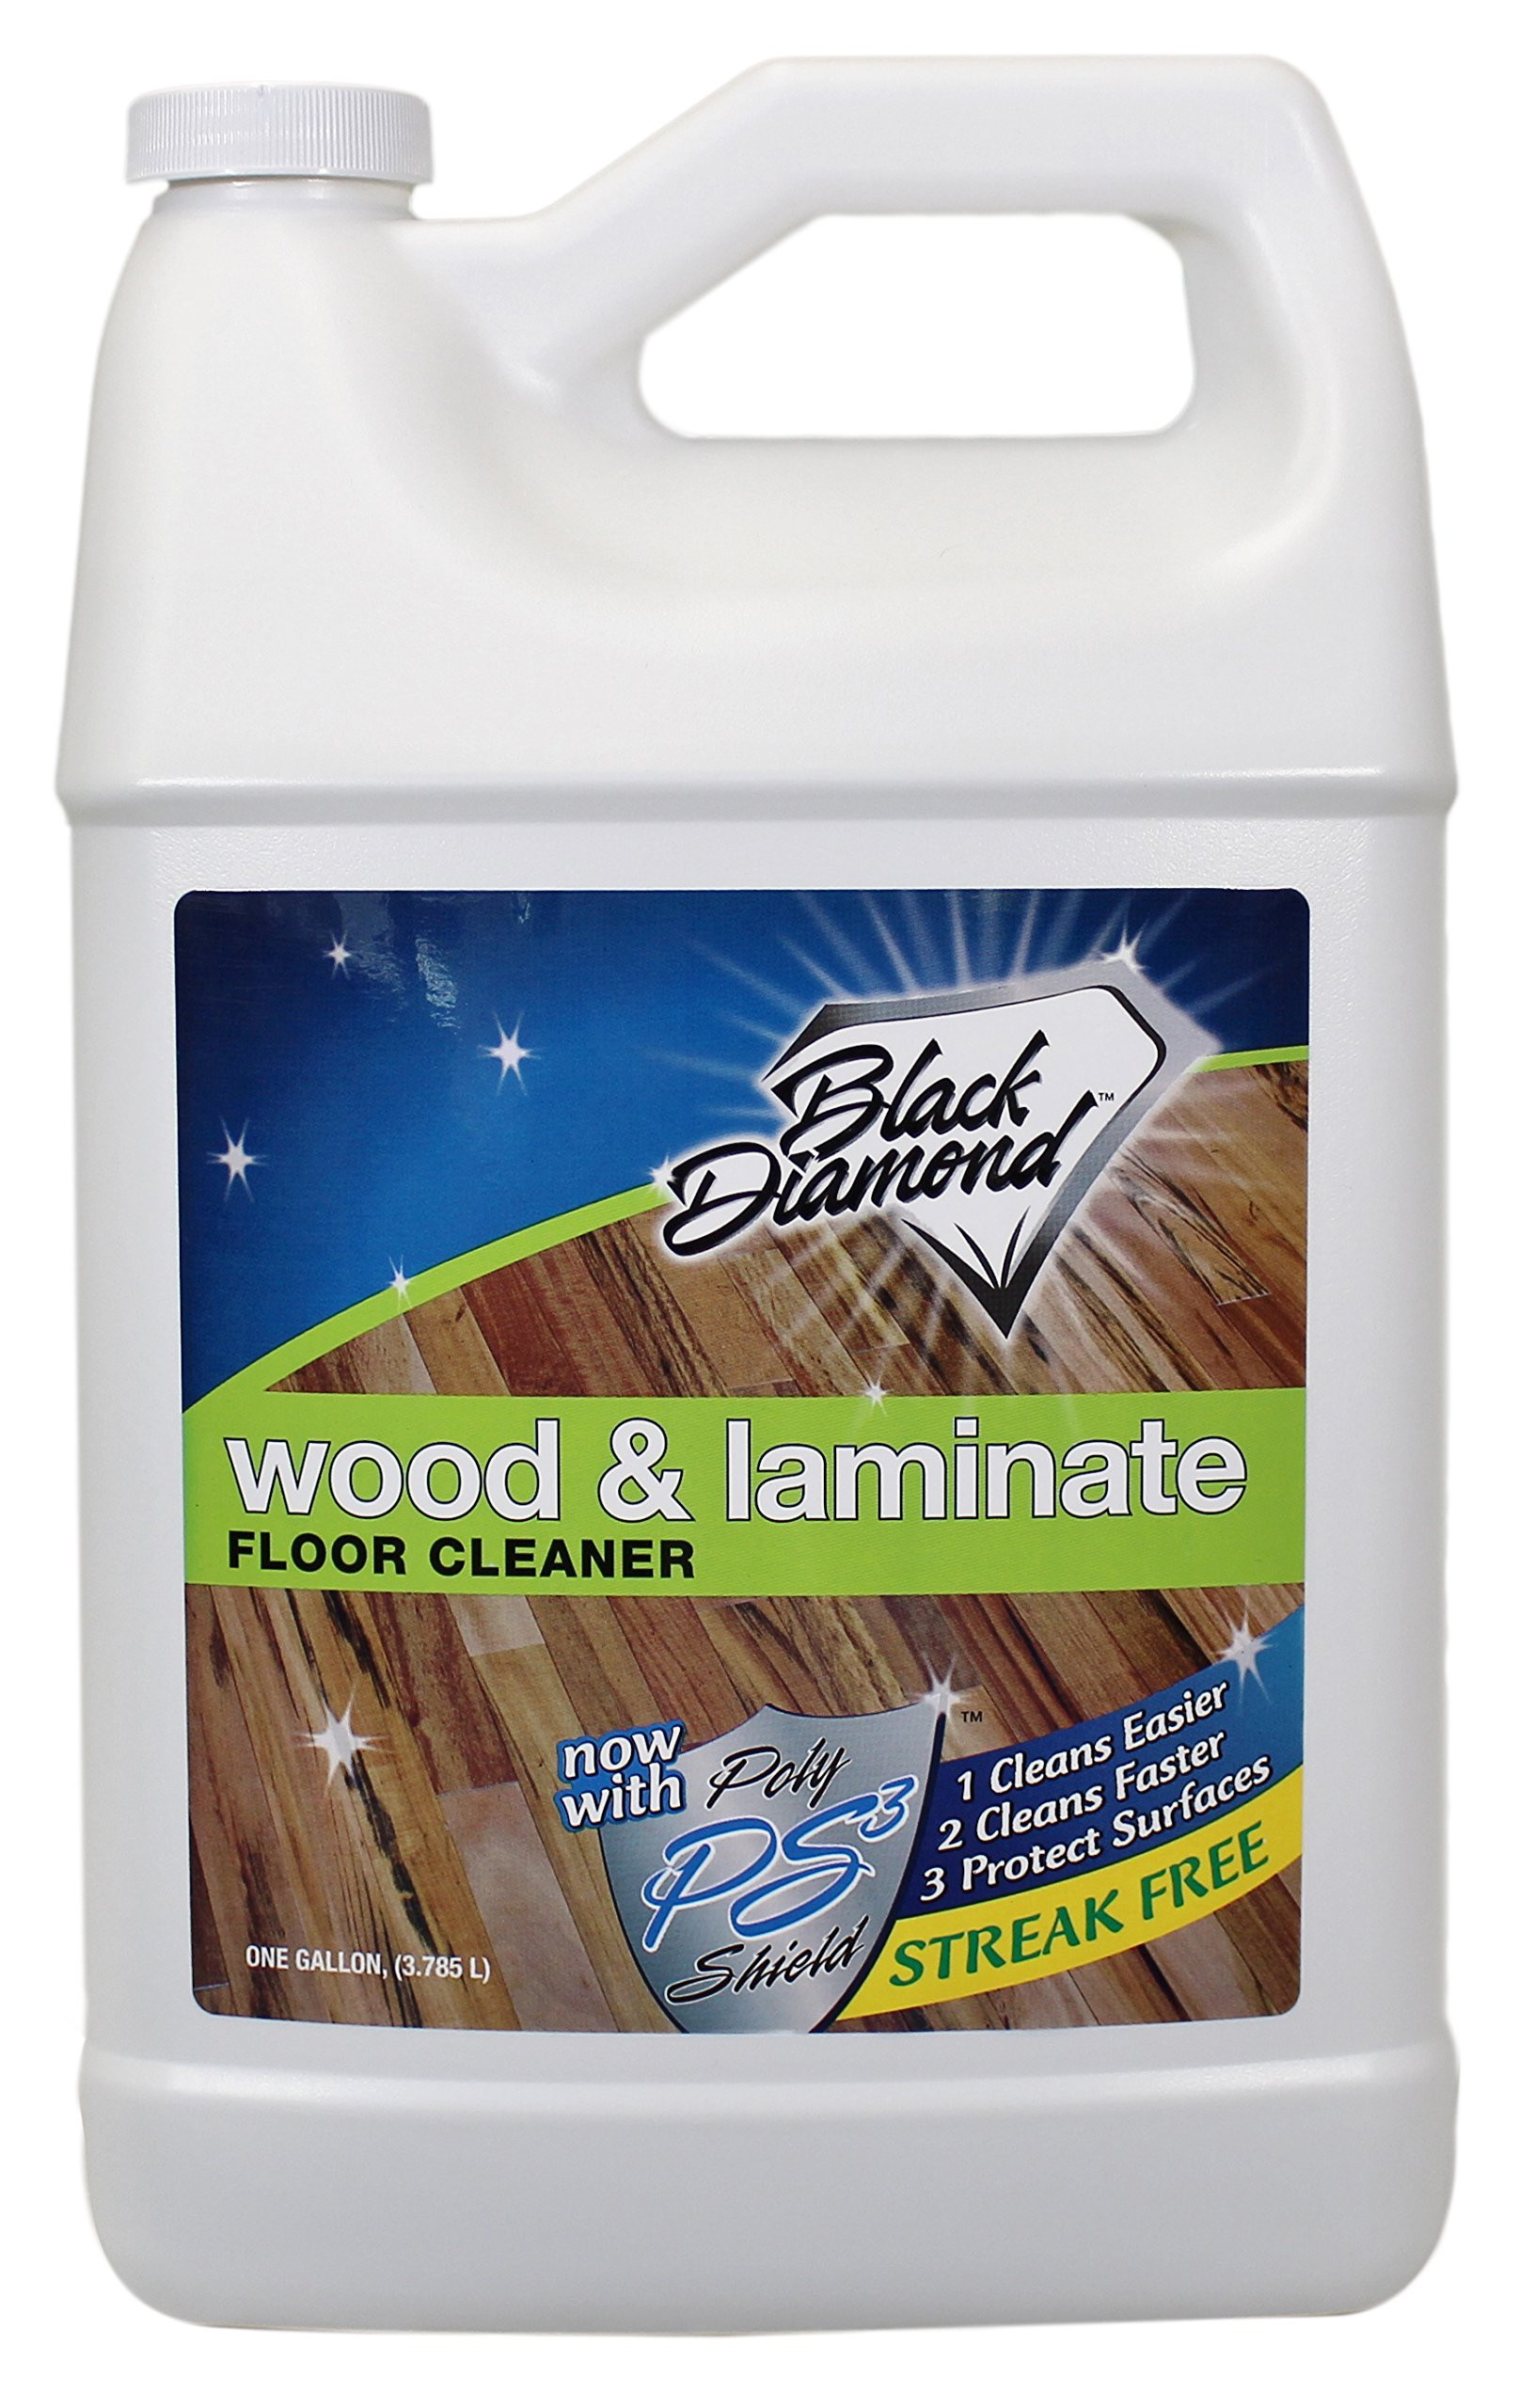 10 Unique Armstrong Hardwood and Laminate Floor Cleaner 32 Oz Spray Bottle 2024 free download armstrong hardwood and laminate floor cleaner 32 oz spray bottle of amazon com black diamond wood laminate floor cleaner for in black diamond stoneworks wood laminate floor cleaner 1 gallon 